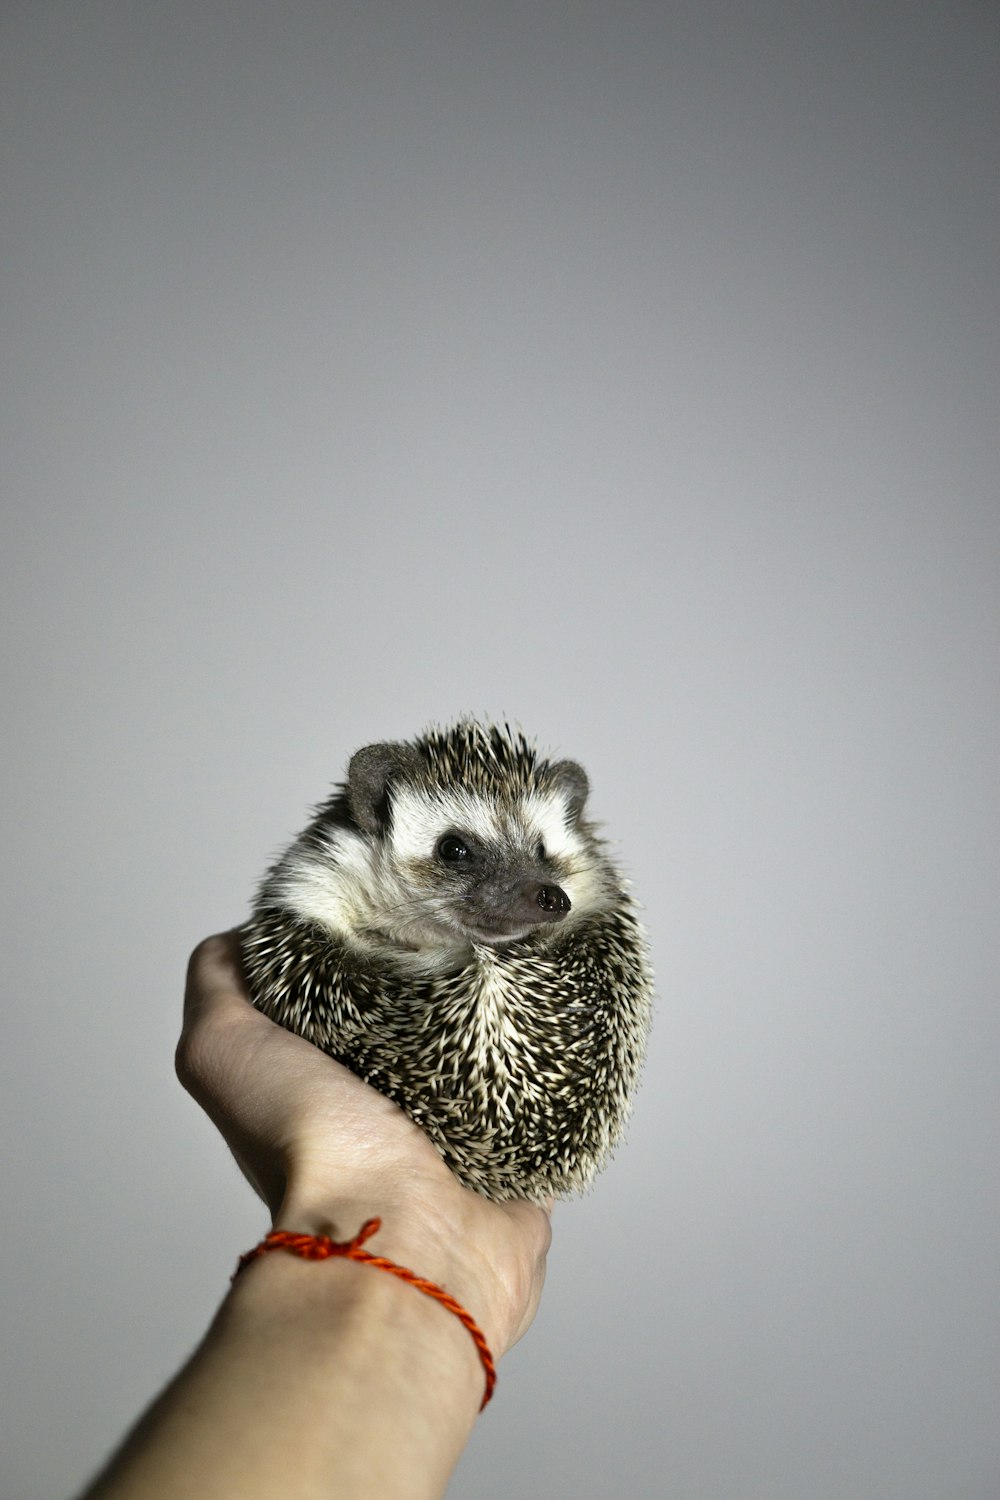 black and white hedgehog on persons hand